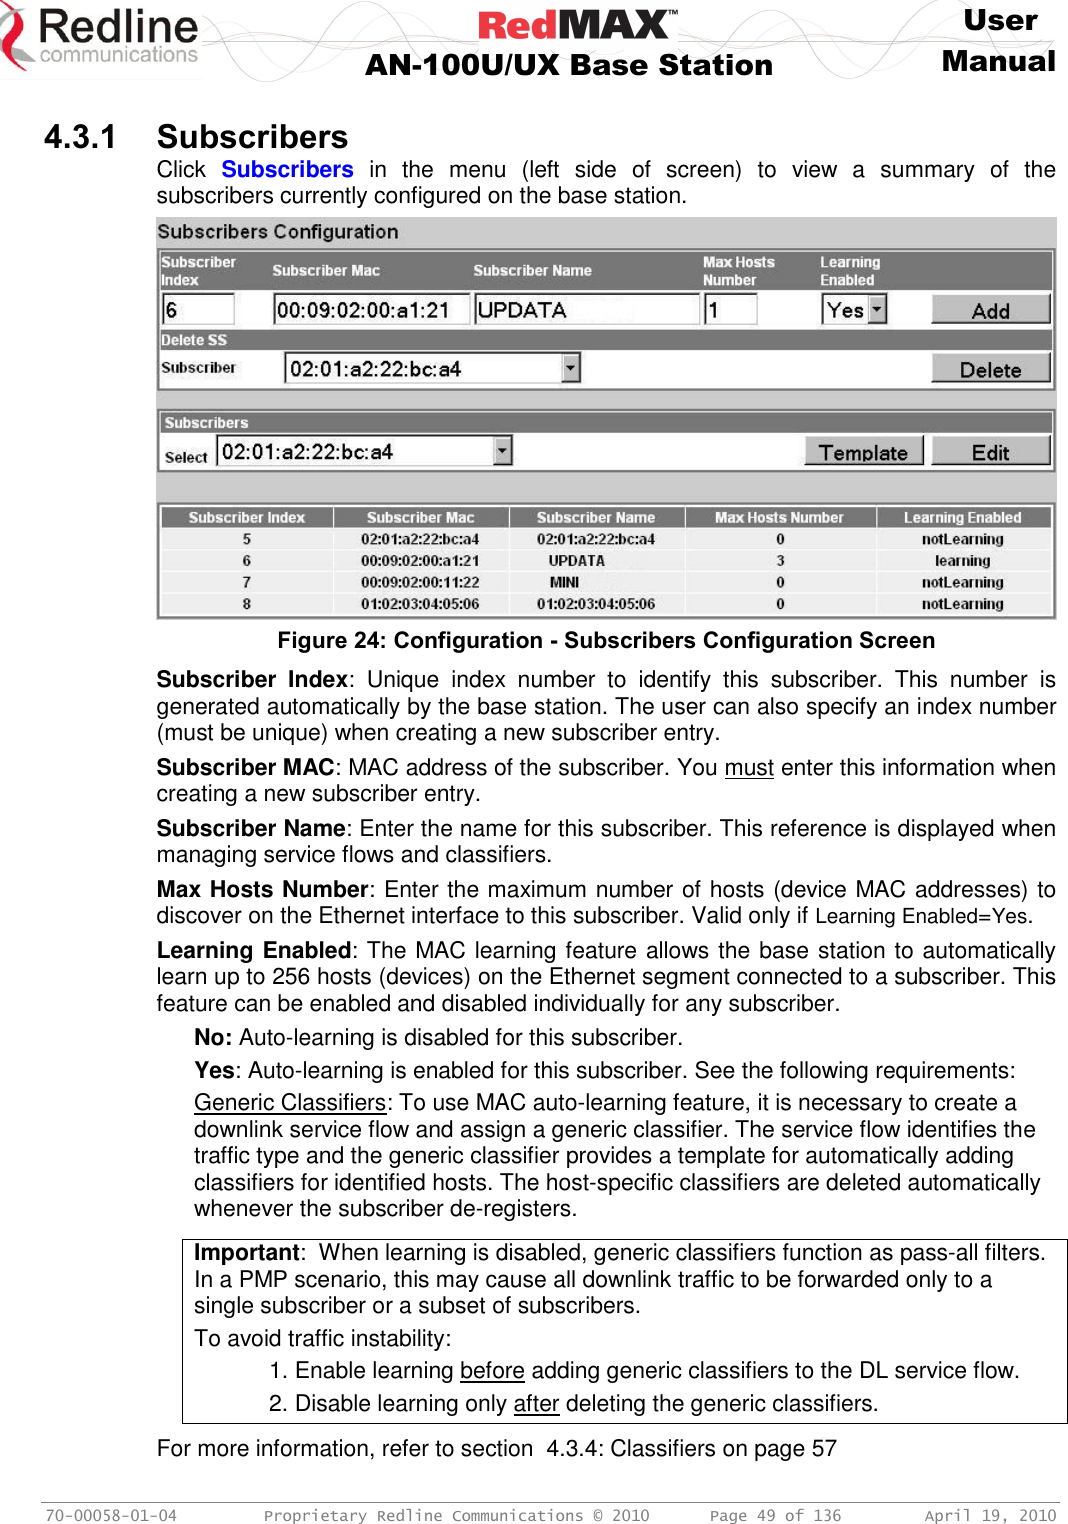     User  AN-100U/UX Base Station Manual   70-00058-01-04  Proprietary Redline Communications © 2010   Page 49 of 136  April 19, 2010  4.3.1 Subscribers Click  Subscribers  in  the  menu  (left  side  of  screen)  to  view  a  summary  of  the subscribers currently configured on the base station.  Figure 24: Configuration - Subscribers Configuration Screen Subscriber  Index:  Unique  index  number  to  identify  this  subscriber.  This  number  is generated automatically by the base station. The user can also specify an index number (must be unique) when creating a new subscriber entry. Subscriber MAC: MAC address of the subscriber. You must enter this information when creating a new subscriber entry. Subscriber Name: Enter the name for this subscriber. This reference is displayed when managing service flows and classifiers.  Max Hosts Number: Enter the maximum number of hosts (device MAC addresses) to discover on the Ethernet interface to this subscriber. Valid only if Learning Enabled=Yes. Learning Enabled: The MAC learning feature allows the base station to automatically learn up to 256 hosts (devices) on the Ethernet segment connected to a subscriber. This feature can be enabled and disabled individually for any subscriber.  No: Auto-learning is disabled for this subscriber. Yes: Auto-learning is enabled for this subscriber. See the following requirements: Generic Classifiers: To use MAC auto-learning feature, it is necessary to create a downlink service flow and assign a generic classifier. The service flow identifies the traffic type and the generic classifier provides a template for automatically adding classifiers for identified hosts. The host-specific classifiers are deleted automatically whenever the subscriber de-registers.  Important:  When learning is disabled, generic classifiers function as pass-all filters. In a PMP scenario, this may cause all downlink traffic to be forwarded only to a single subscriber or a subset of subscribers. To avoid traffic instability:     1. Enable learning before adding generic classifiers to the DL service flow.      2. Disable learning only after deleting the generic classifiers.  For more information, refer to section  4.3.4: Classifiers on page 57 